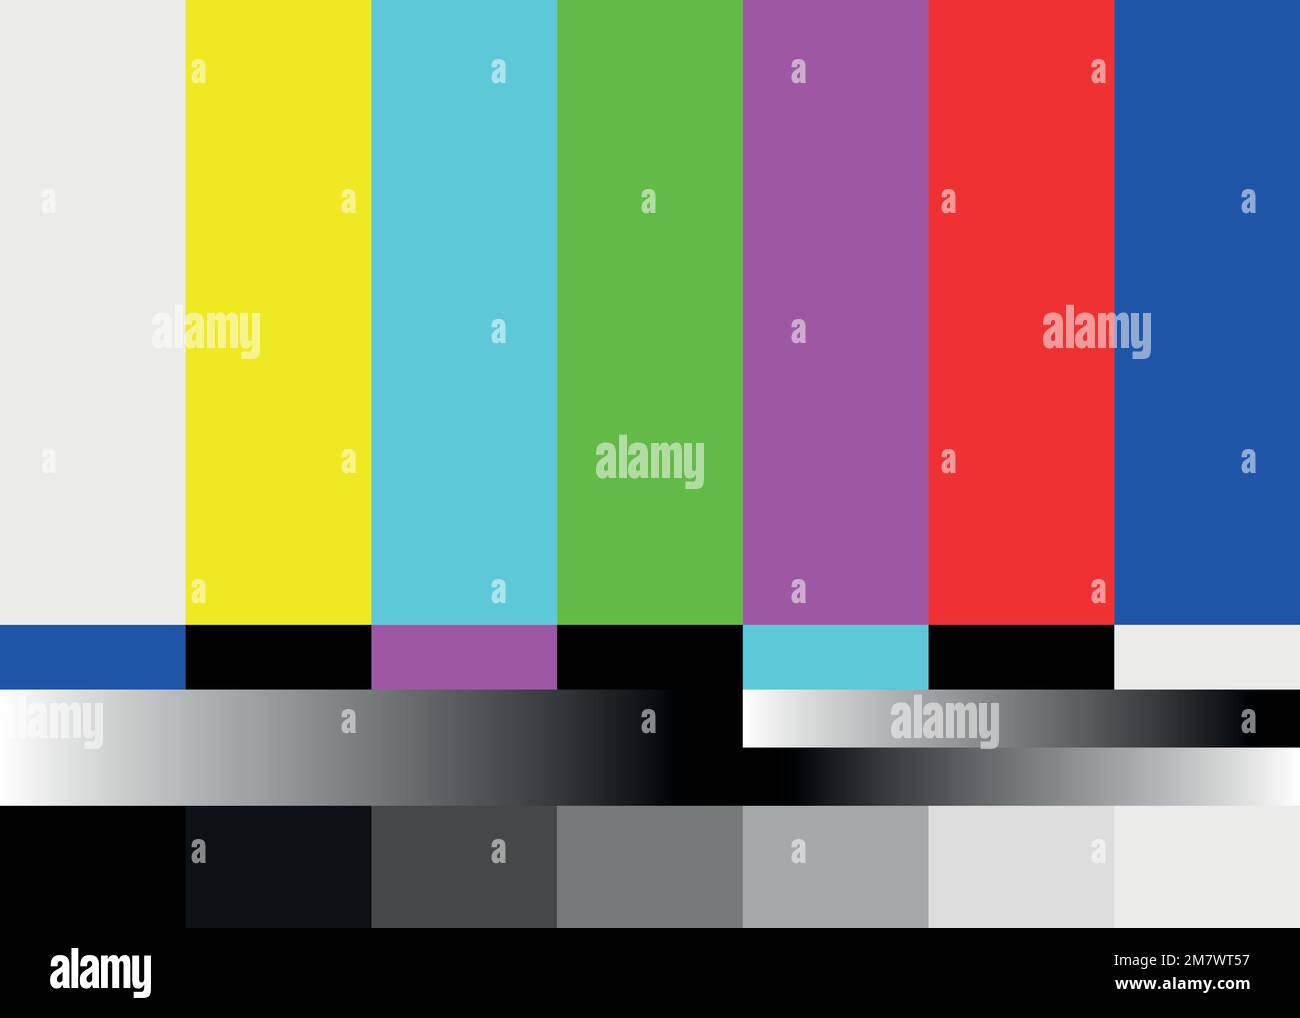 No Signal TV Test Pattern Vector. Television Colored Bars Signal. Introduction And The End Of The TV Programming. SMPTE Color Bars Illustration. Stock Vector